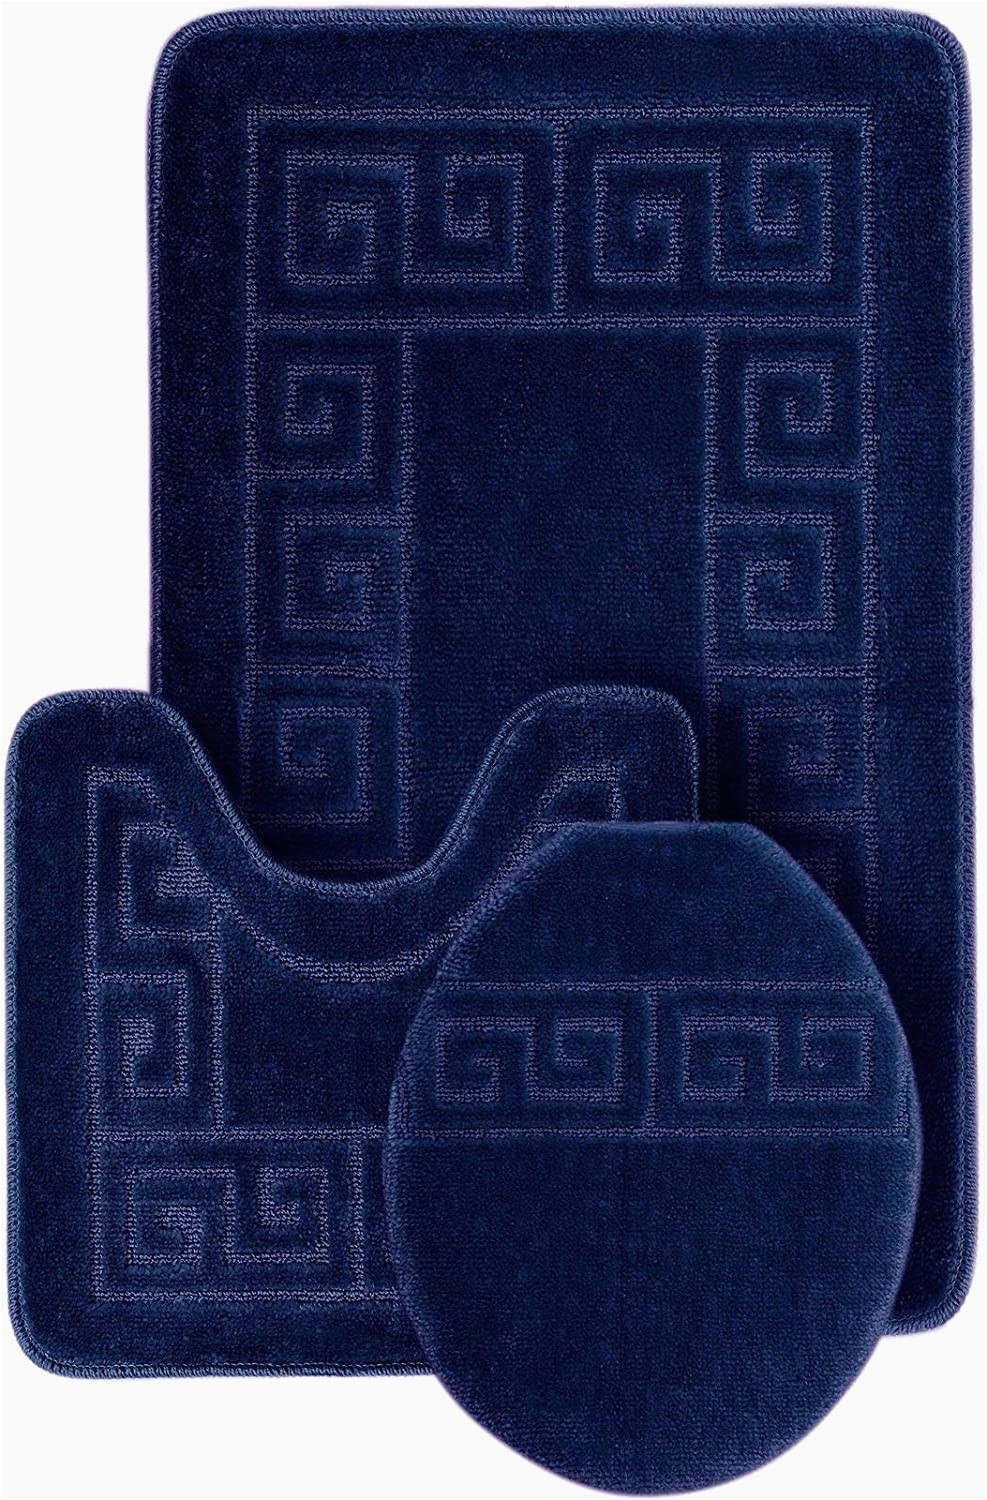 Bathroom Rug Sets with Elongated Lid Cover Wpm World Products Mart Bathroom Rugs Set 3 Piece Bath Pattern Rug 20"x32" Contour Mats 20"x20" with Lid Cover Navy